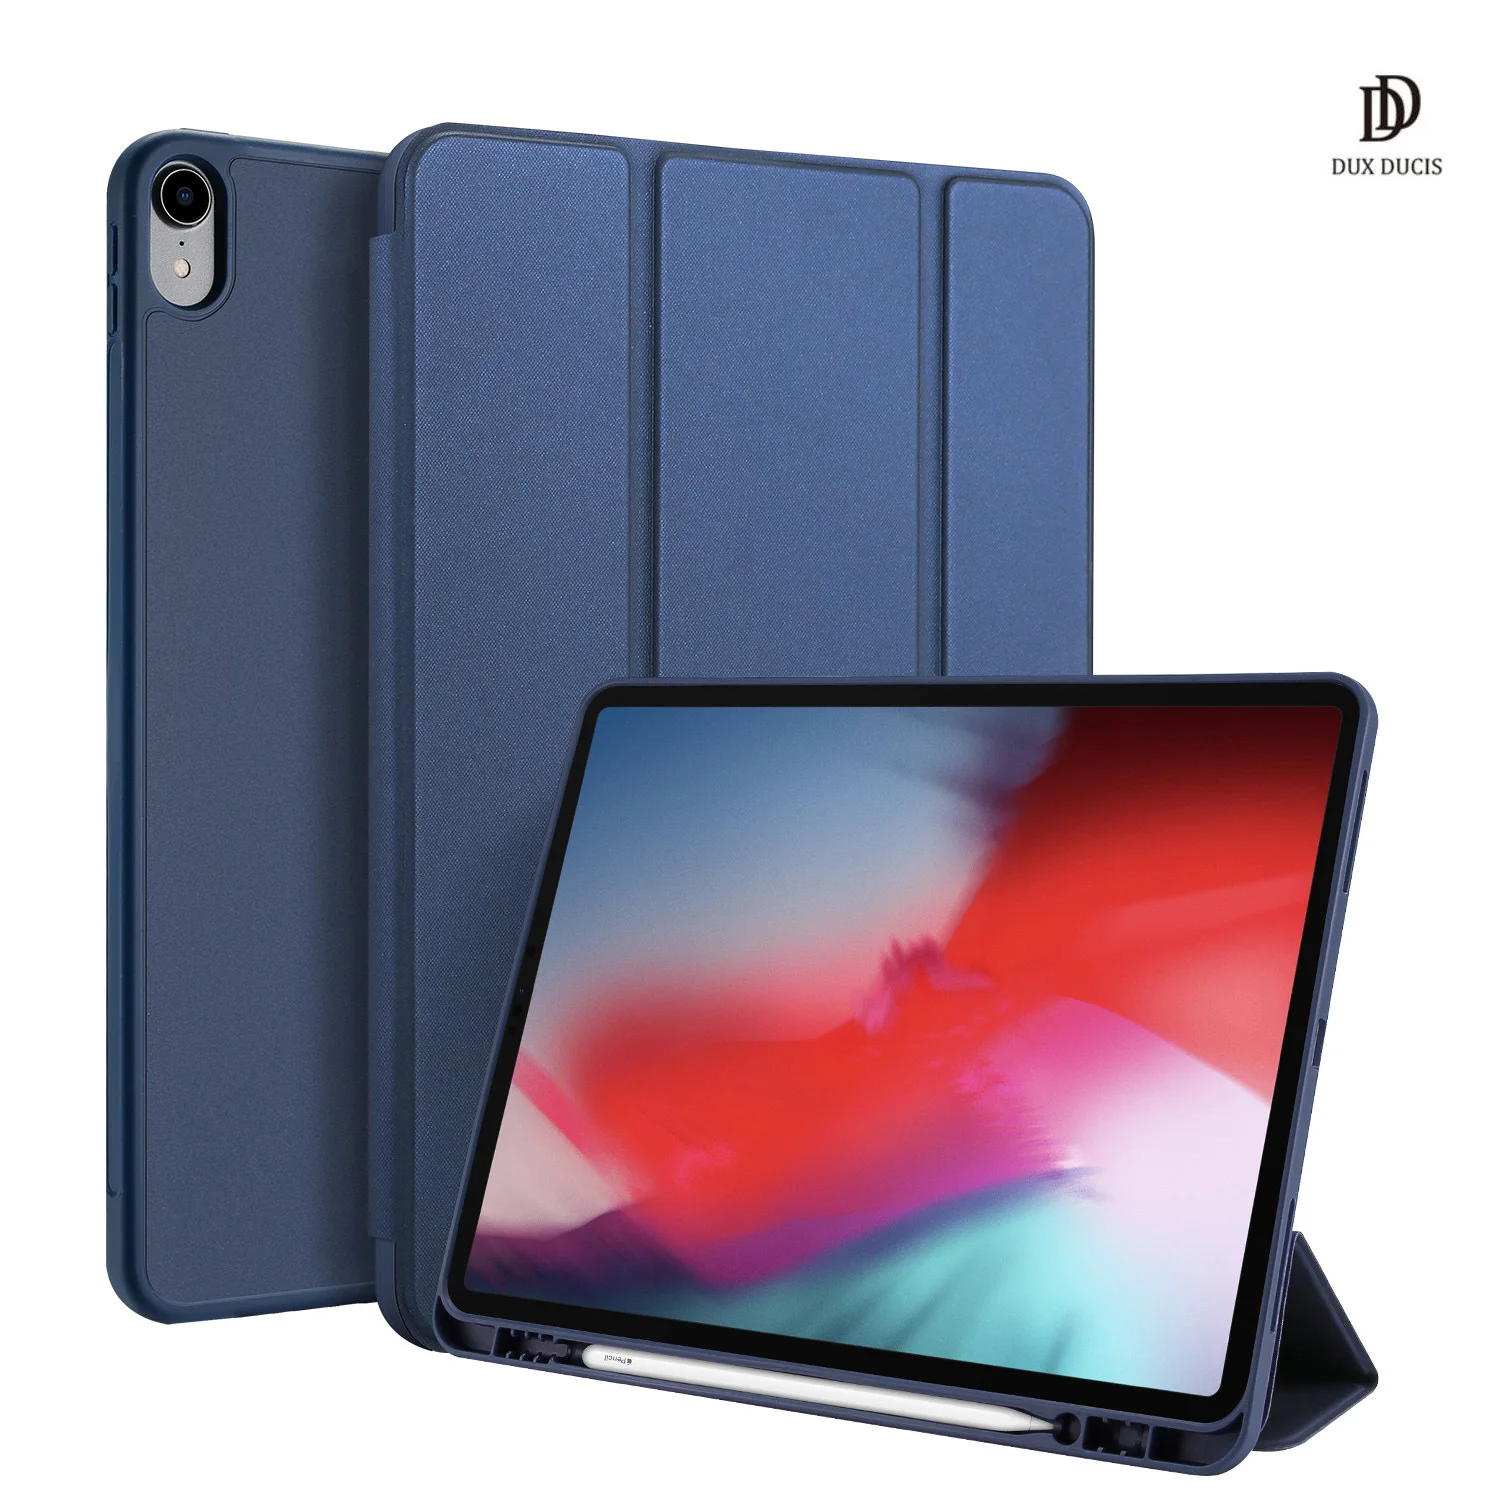 

Tablet Leather Case For iPad Pro 12.9 2018 Smart Sleep Wake DUX DUCIS OSOM Series with Pencil Holder Trifold Stand Clear Back